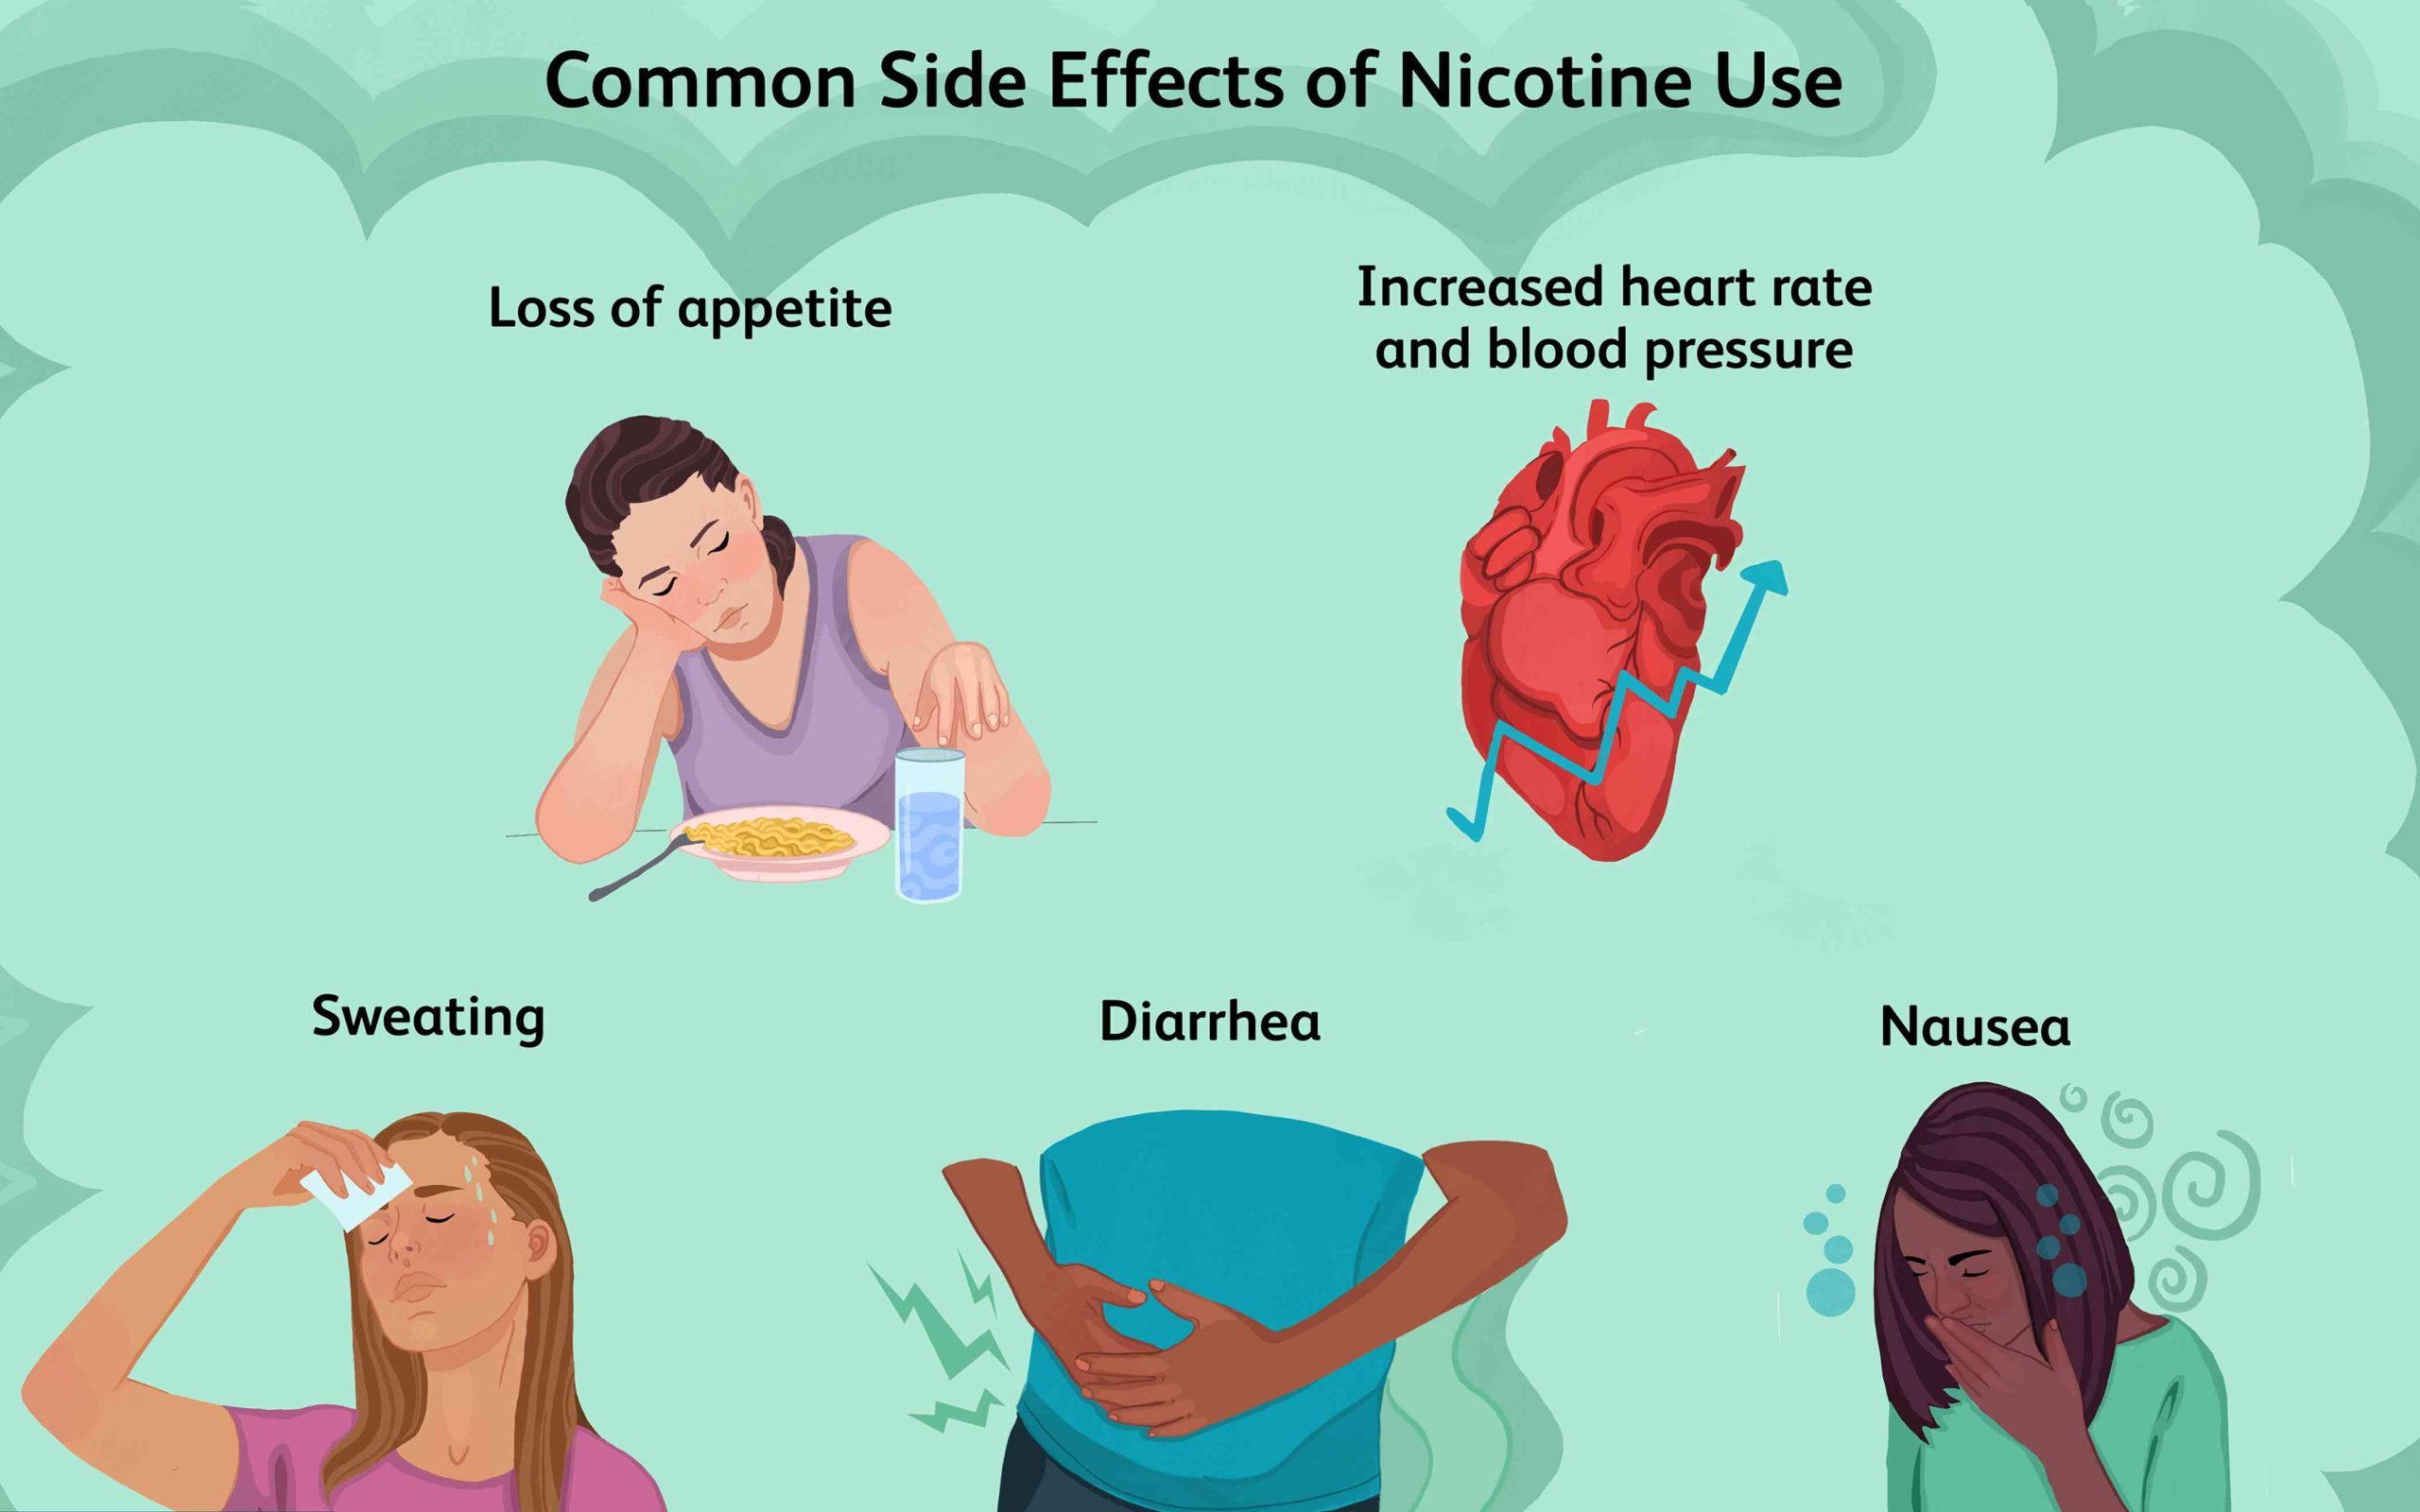 How to quit Nicotine use?